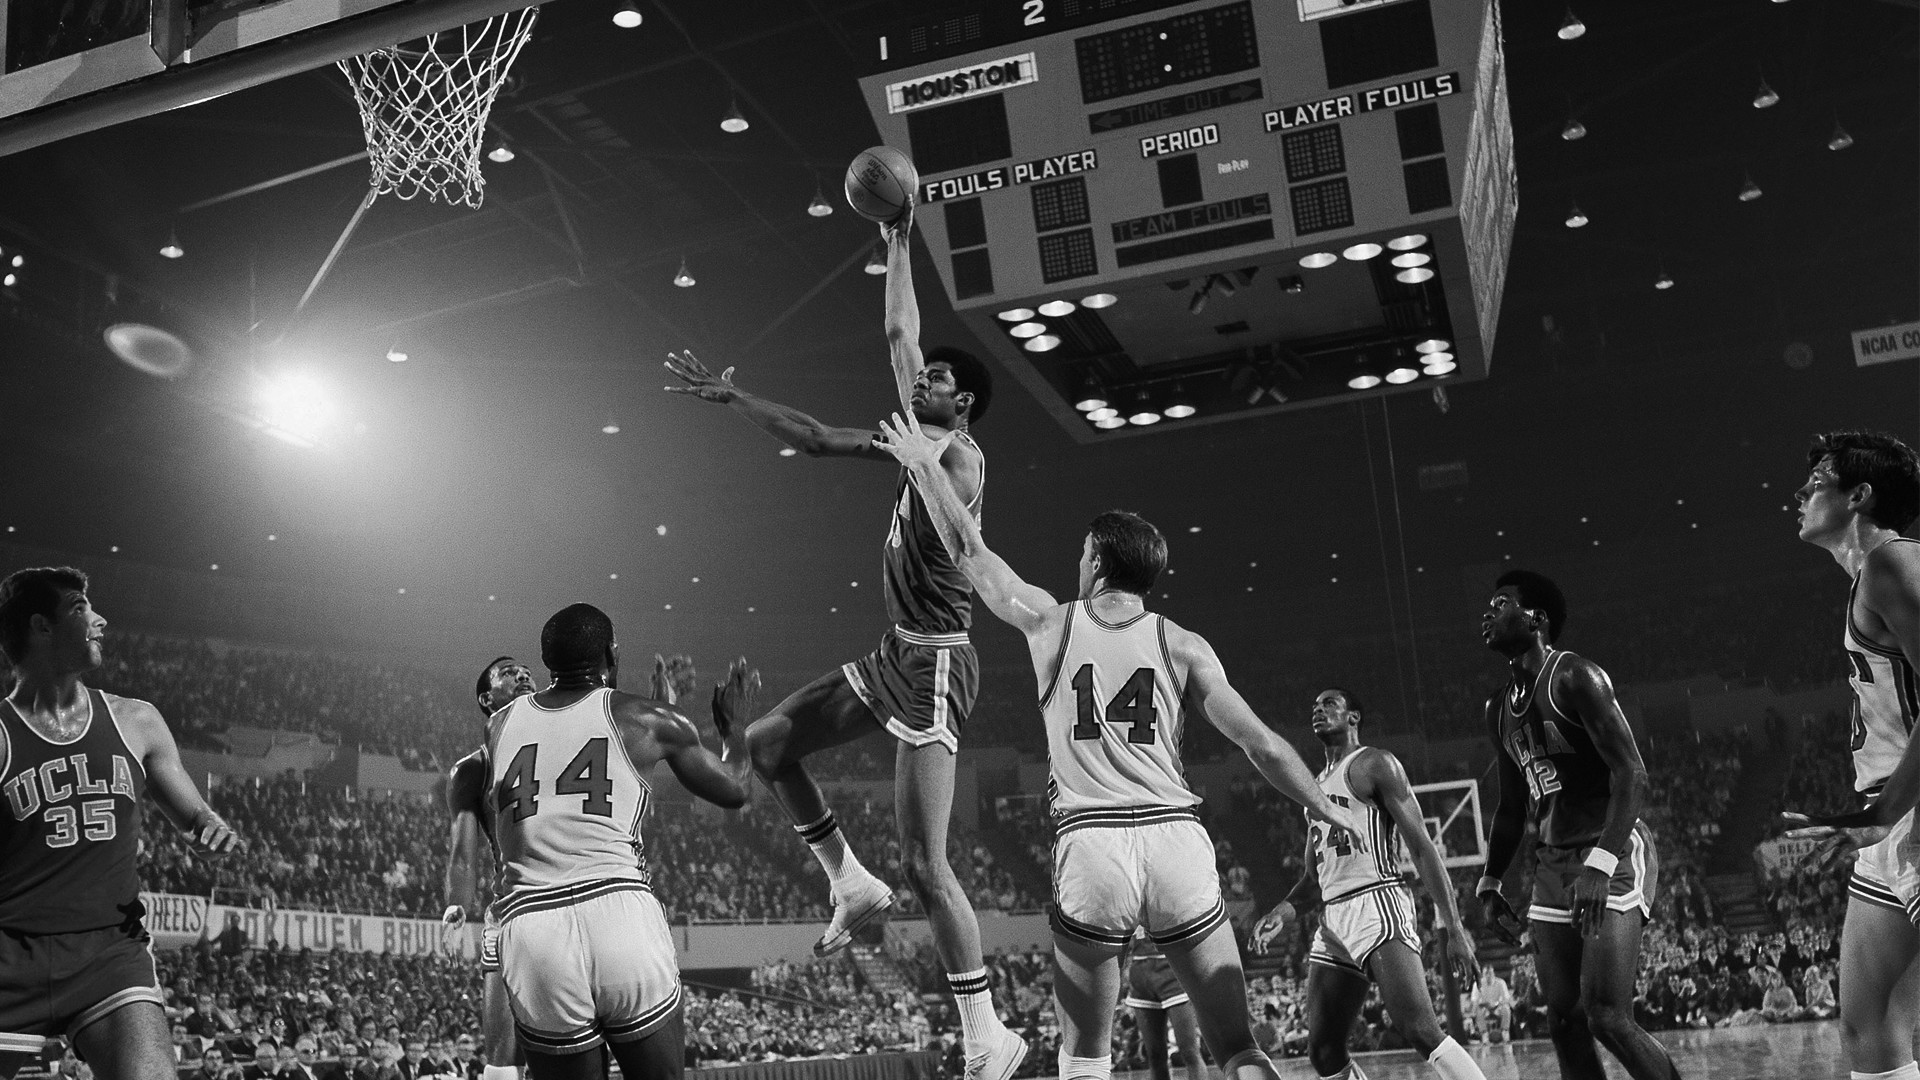 1920x1080 Basketball traditionalists used to loathe the slam dunk, and racism  contributed to the banning of the crowd-pleasing move from college  basketball in 1967.